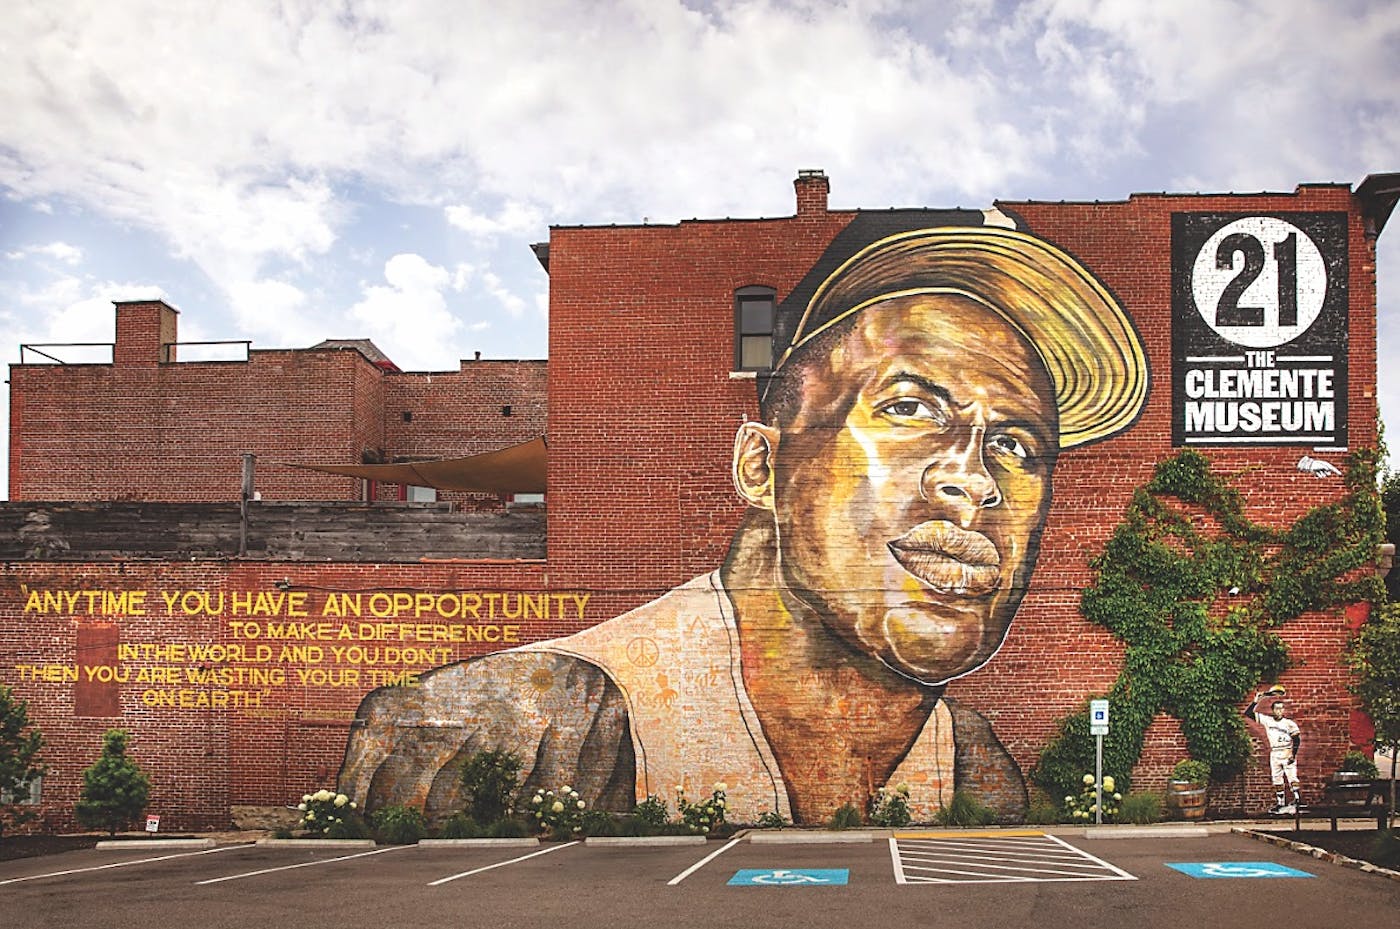 Mural of Roberto Clemente outside The Clemente Museum in Pittsburgh, Pennsylvania (photo courtesy of The Clemente Museum))